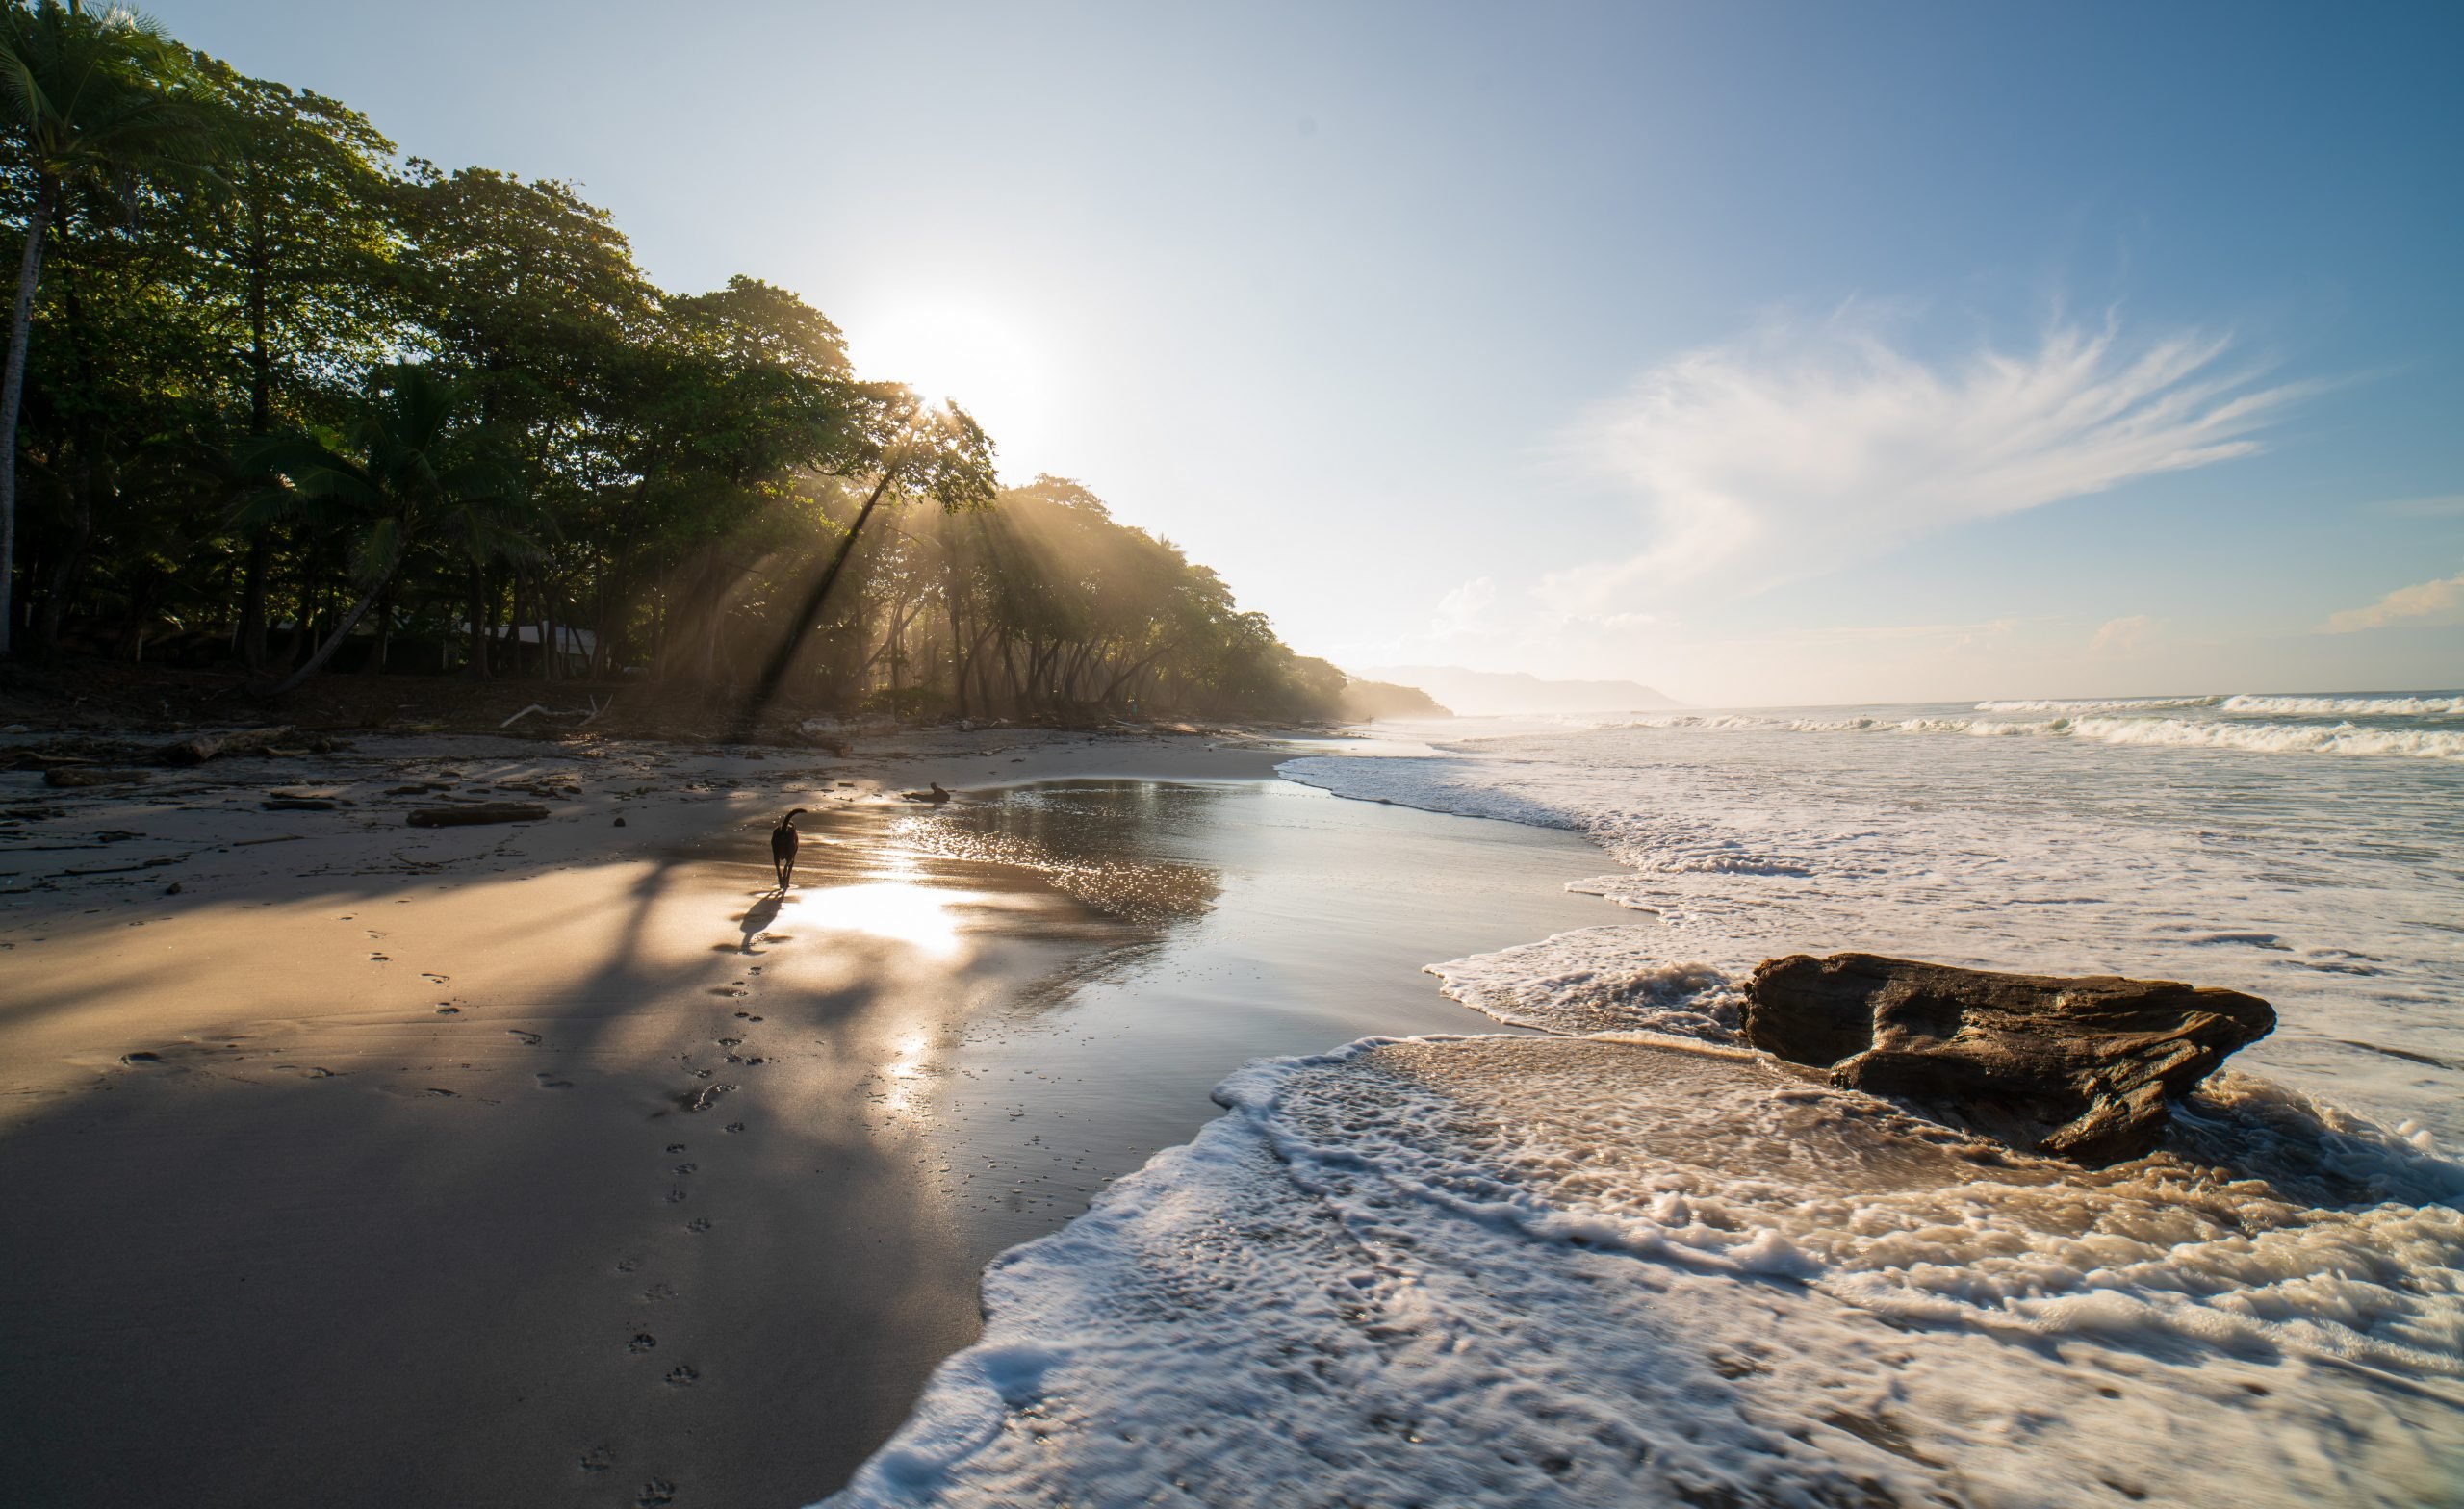 How To Get From Santa Teresa to Jaco Beach - All Possible Ways, cheapest way from Santa Teresa to Jaco, Santa Teresa to Jaco, Santa Teresa costa rica to Jaco, Santa Teresa to Jaco bus, Santa Teresa to Jaco costa rica, Ferry schedule Puntarenas to Paquera, Paquera to Cobano, Cobano to Santa Teresa, Puntarenas to Jaco , Santa Teresa to Cobano